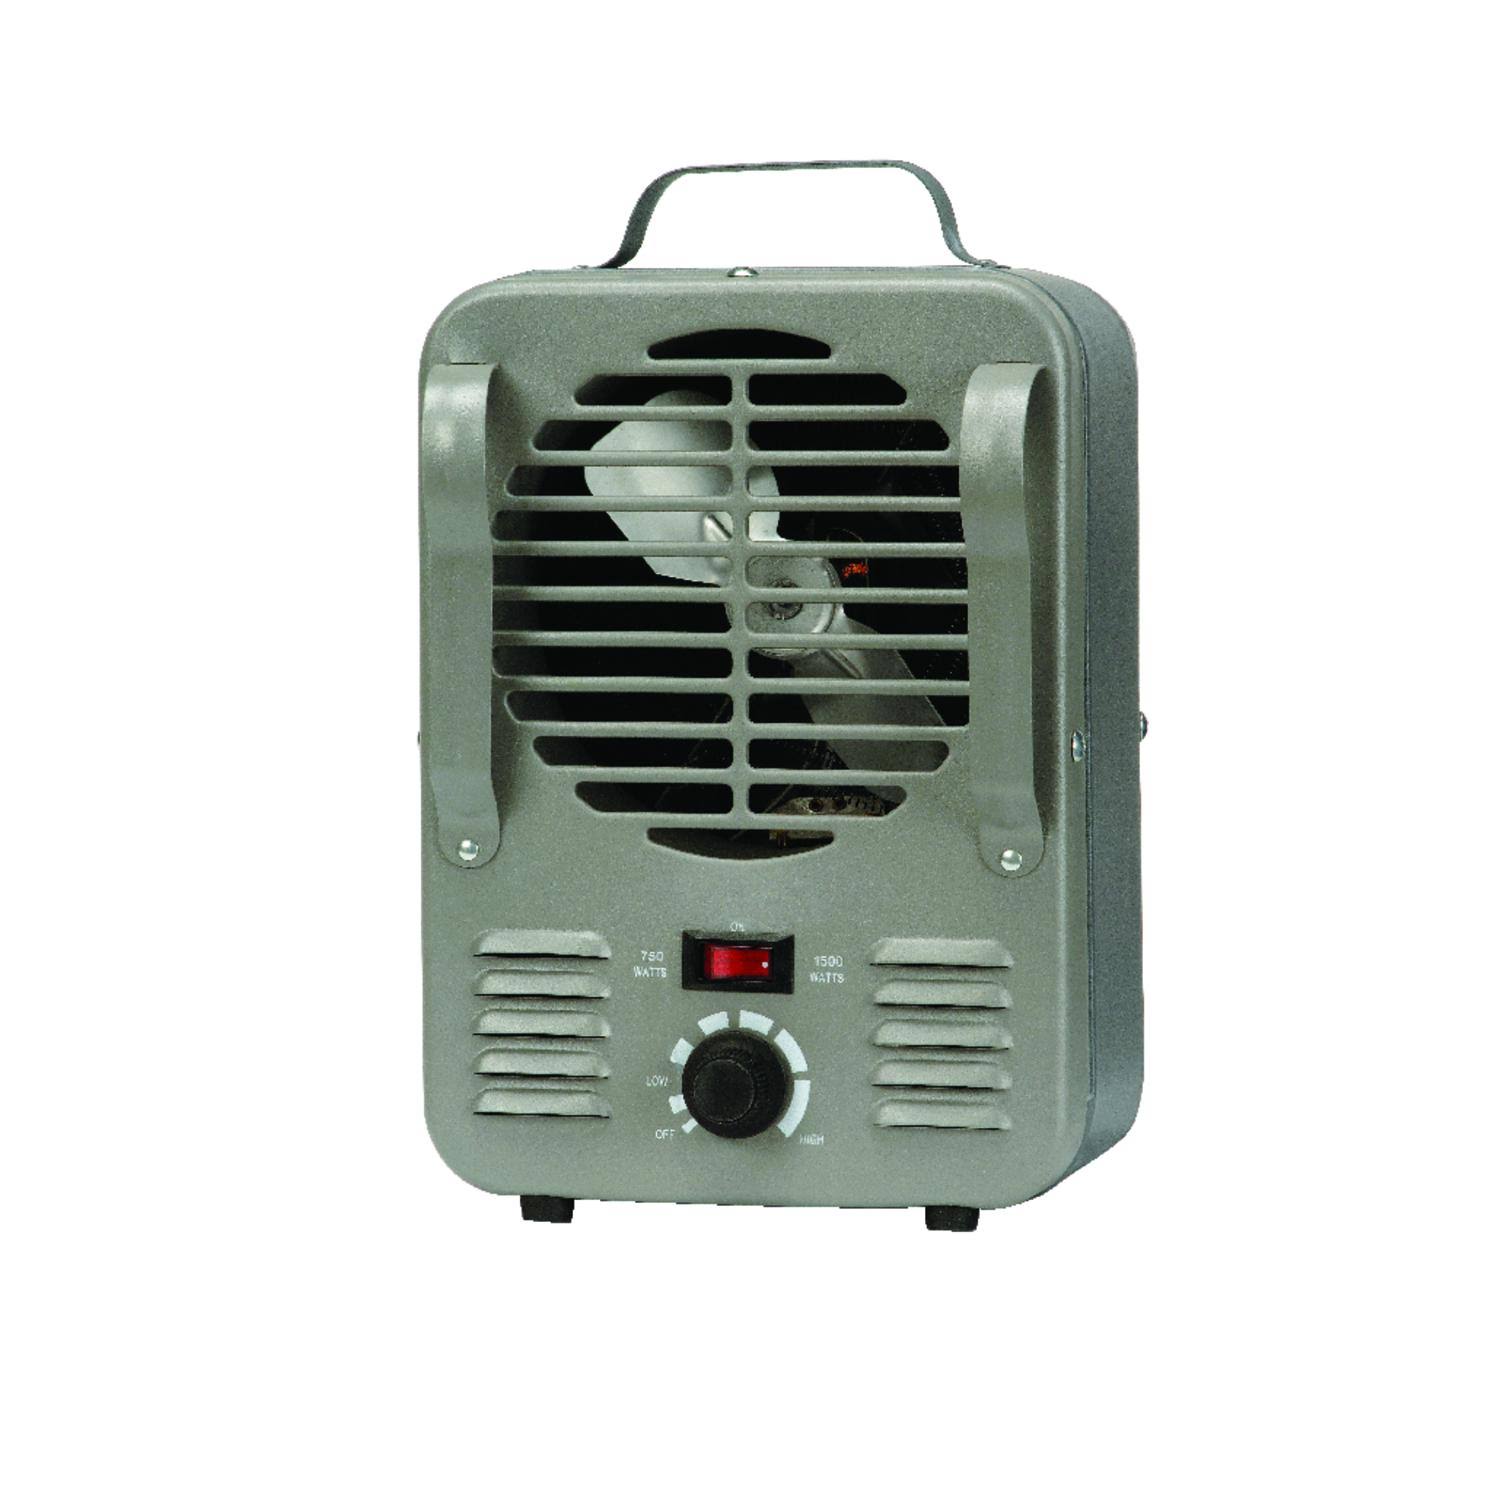 Soleil Milk House 200 Sq ft Electric Utility Heater